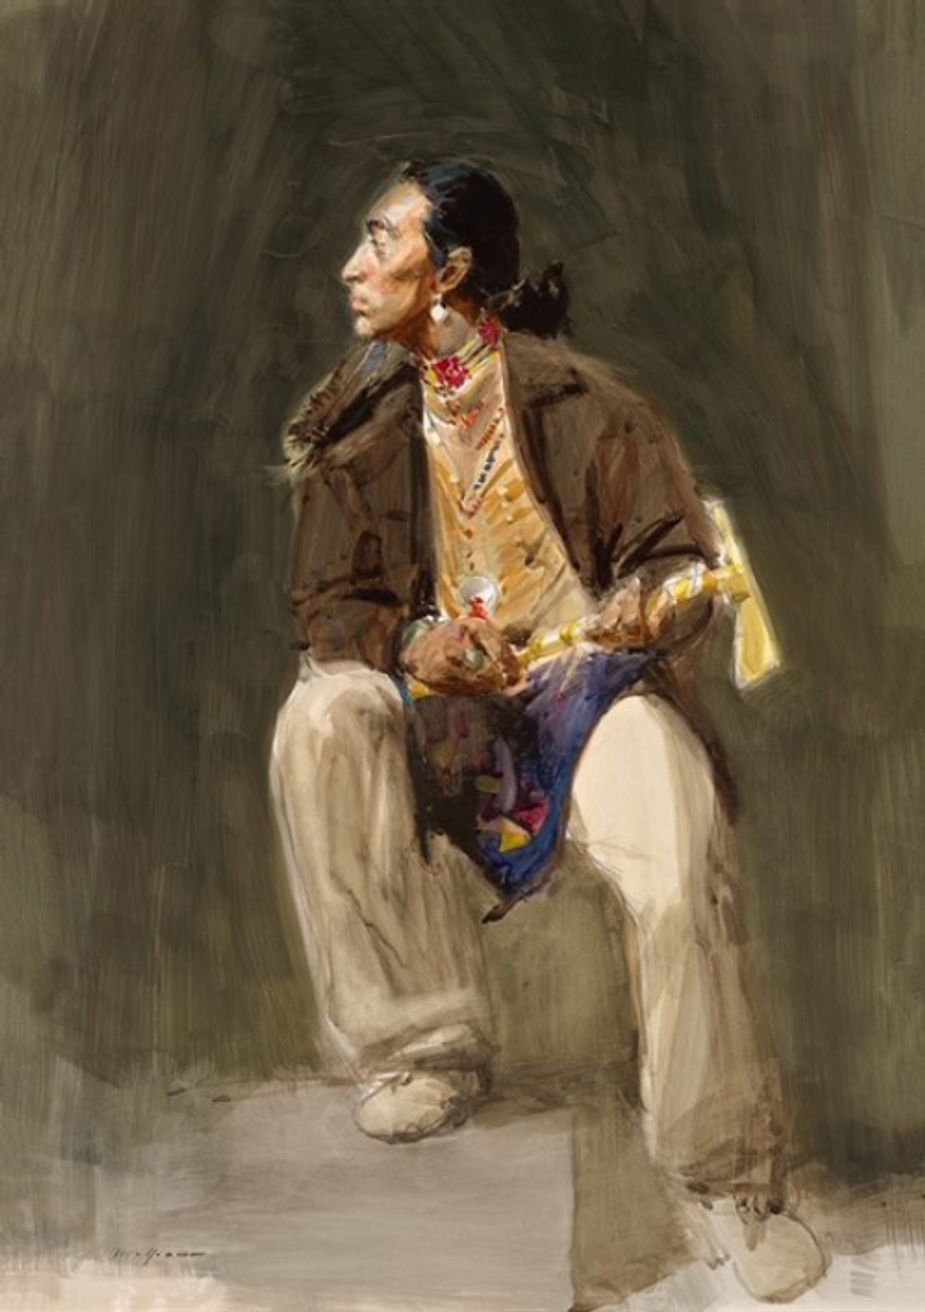 The Woolaroc Retrospective Exhibit & Sale is a chance to own stunning art like "Reluctant Warrior" watercolor on Bristol board by Sherrie McGraw.